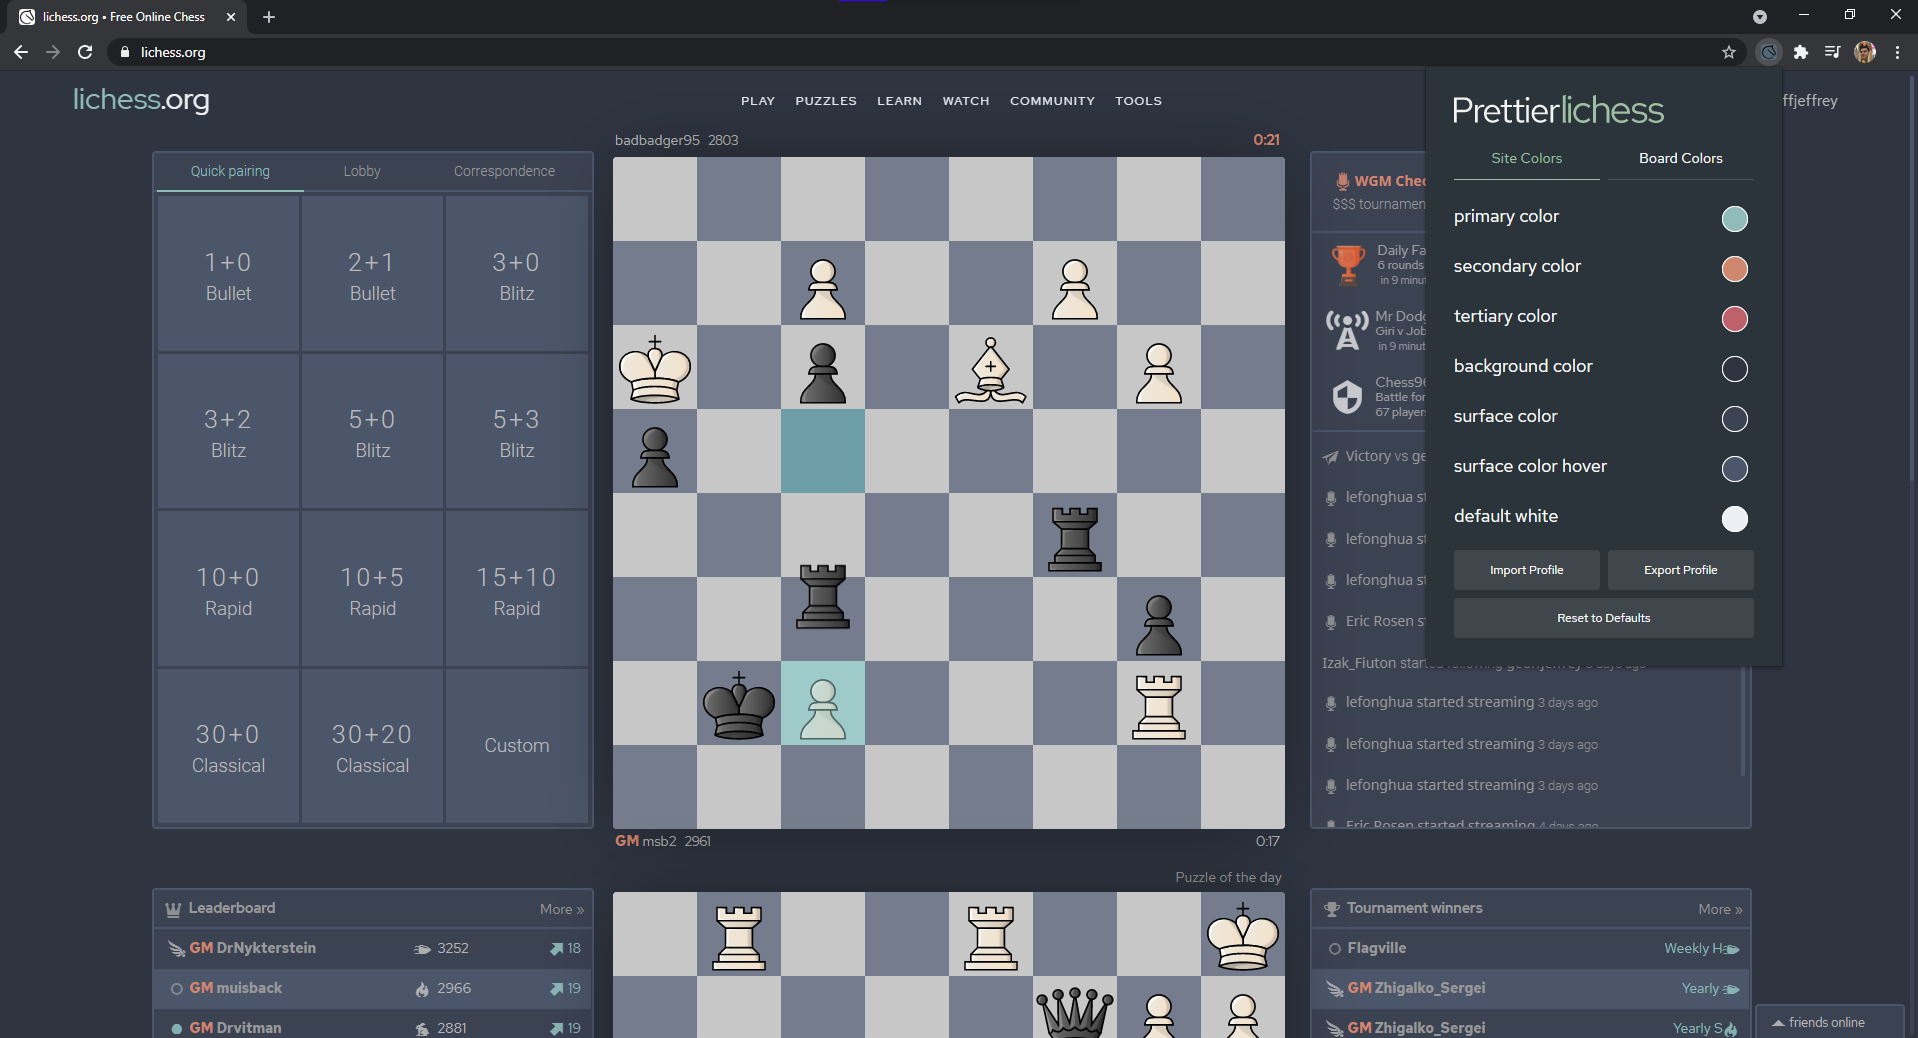 Screenshot of homepage with prettierlichess enabled